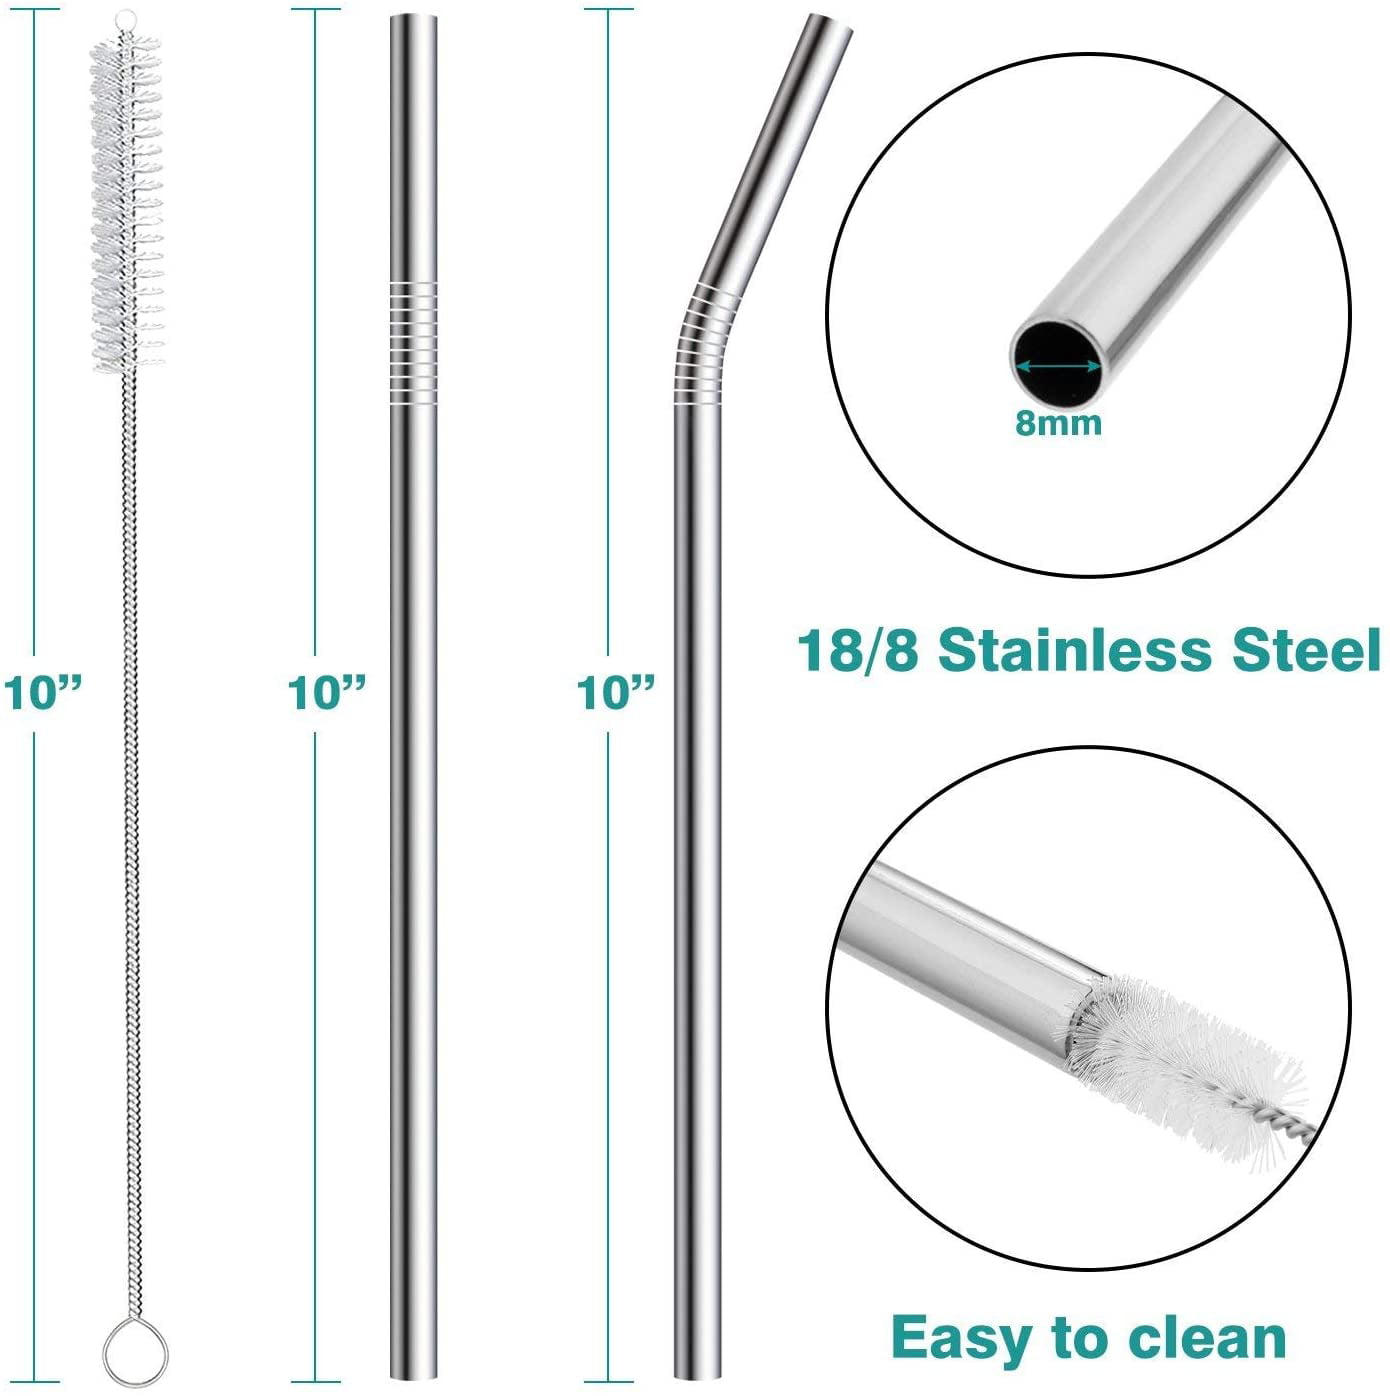 10pc Reusable Drinking Straw Stainless Steel Metal Straws Wide Straw Smoothies 